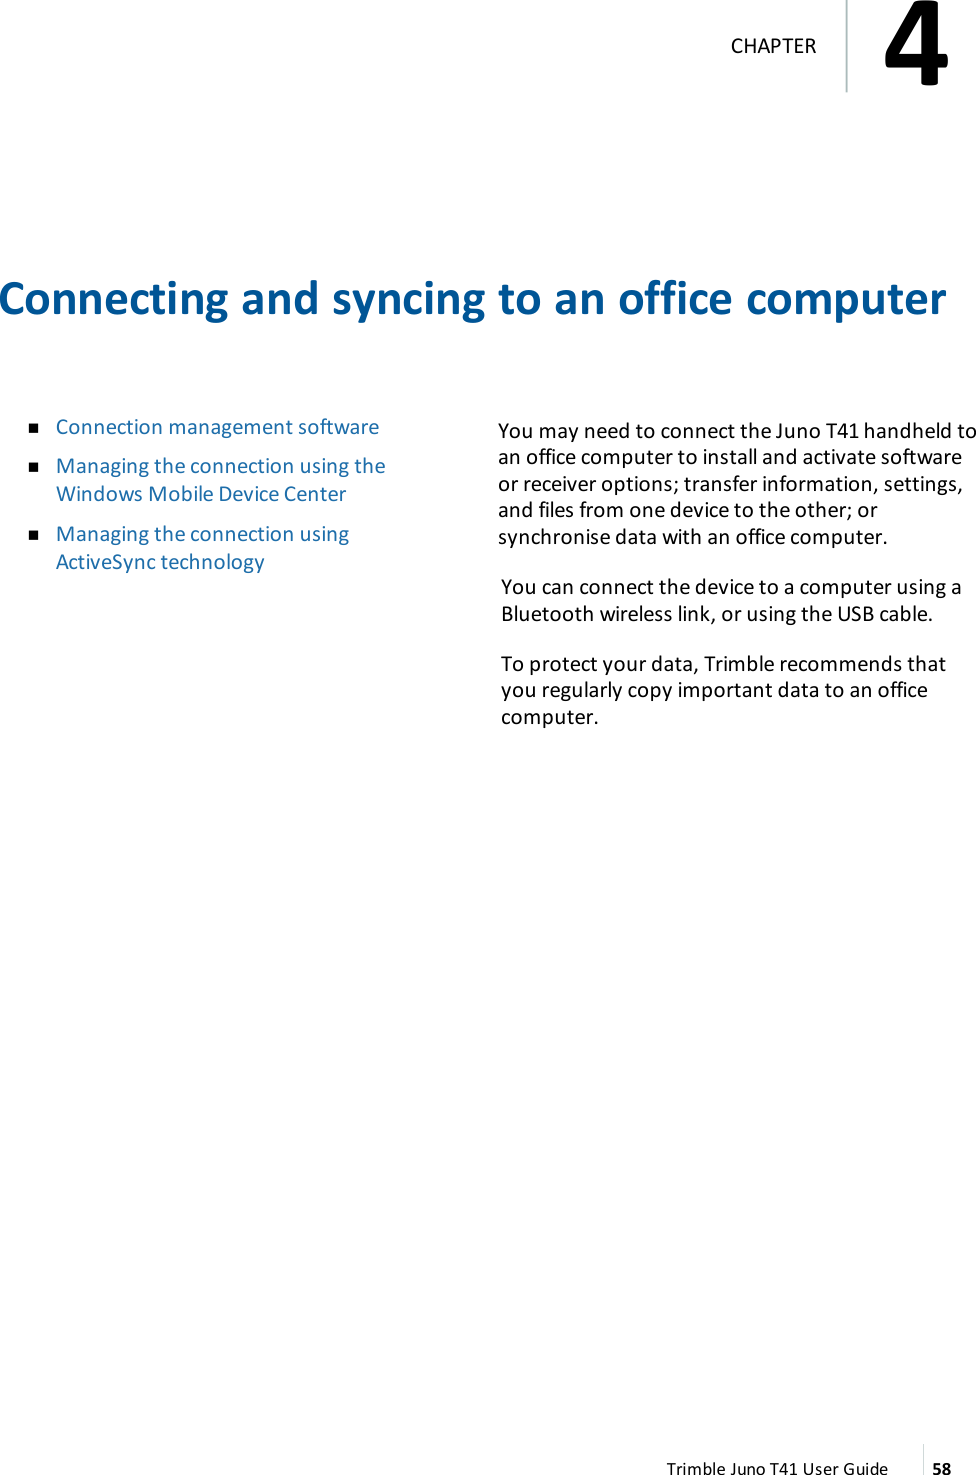 Connecting and syncing to an office computernConnection management softwarenManaging the connection using theWindows Mobile Device CenternManaging the connection usingActiveSync technologyYou may need to connect the Juno T41 handheld toan office computer to install and activate softwareor receiver options; transfer information, settings,and files from one device to the other; orsynchronise data with an office computer.You can connect the device to a computer using aBluetooth wireless link, or using the USB cable.To protect your data, Trimble recommends thatyou regularly copy important data to an officecomputer.Trimble Juno T41 User Guide 584CHAPTER